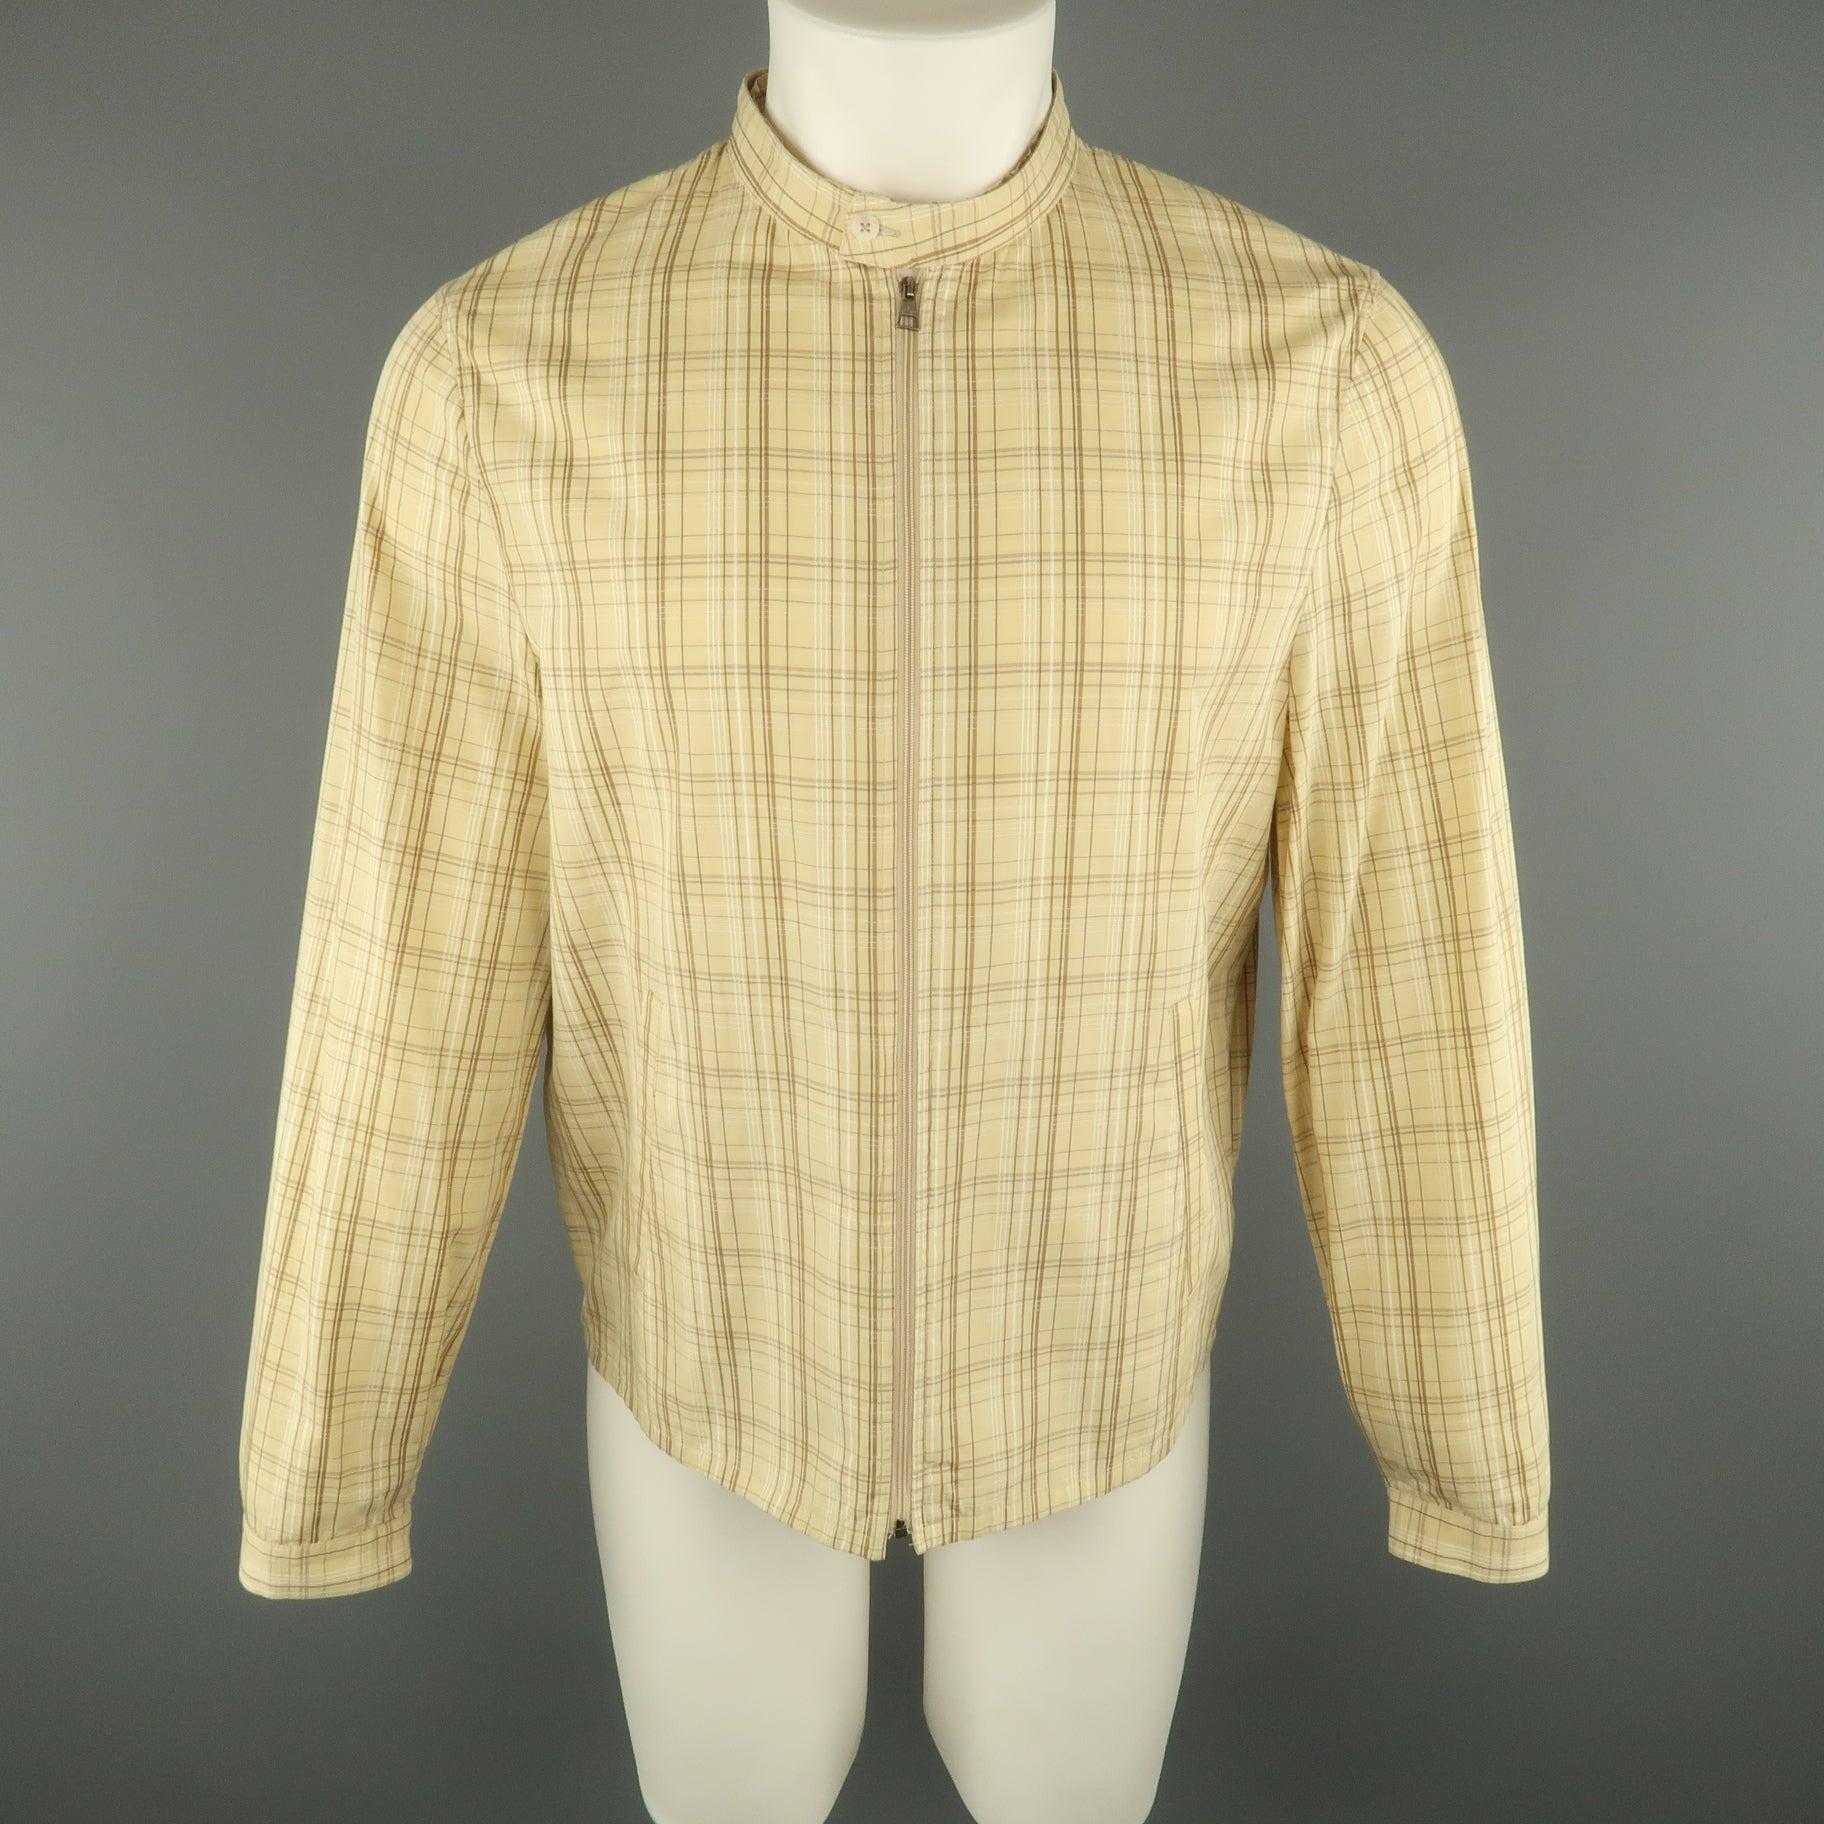 NEIL BARRETT Jacket comes in khaki tones in a plaid material, with slit pockets, buttoned cuffs and detachable zipped collar, unlined. Made in Italy.
Excellent Pre-Owned Condition.
 

Marked:   M
 

Measurements: 
  
l	Shoulder: 17.5 inches